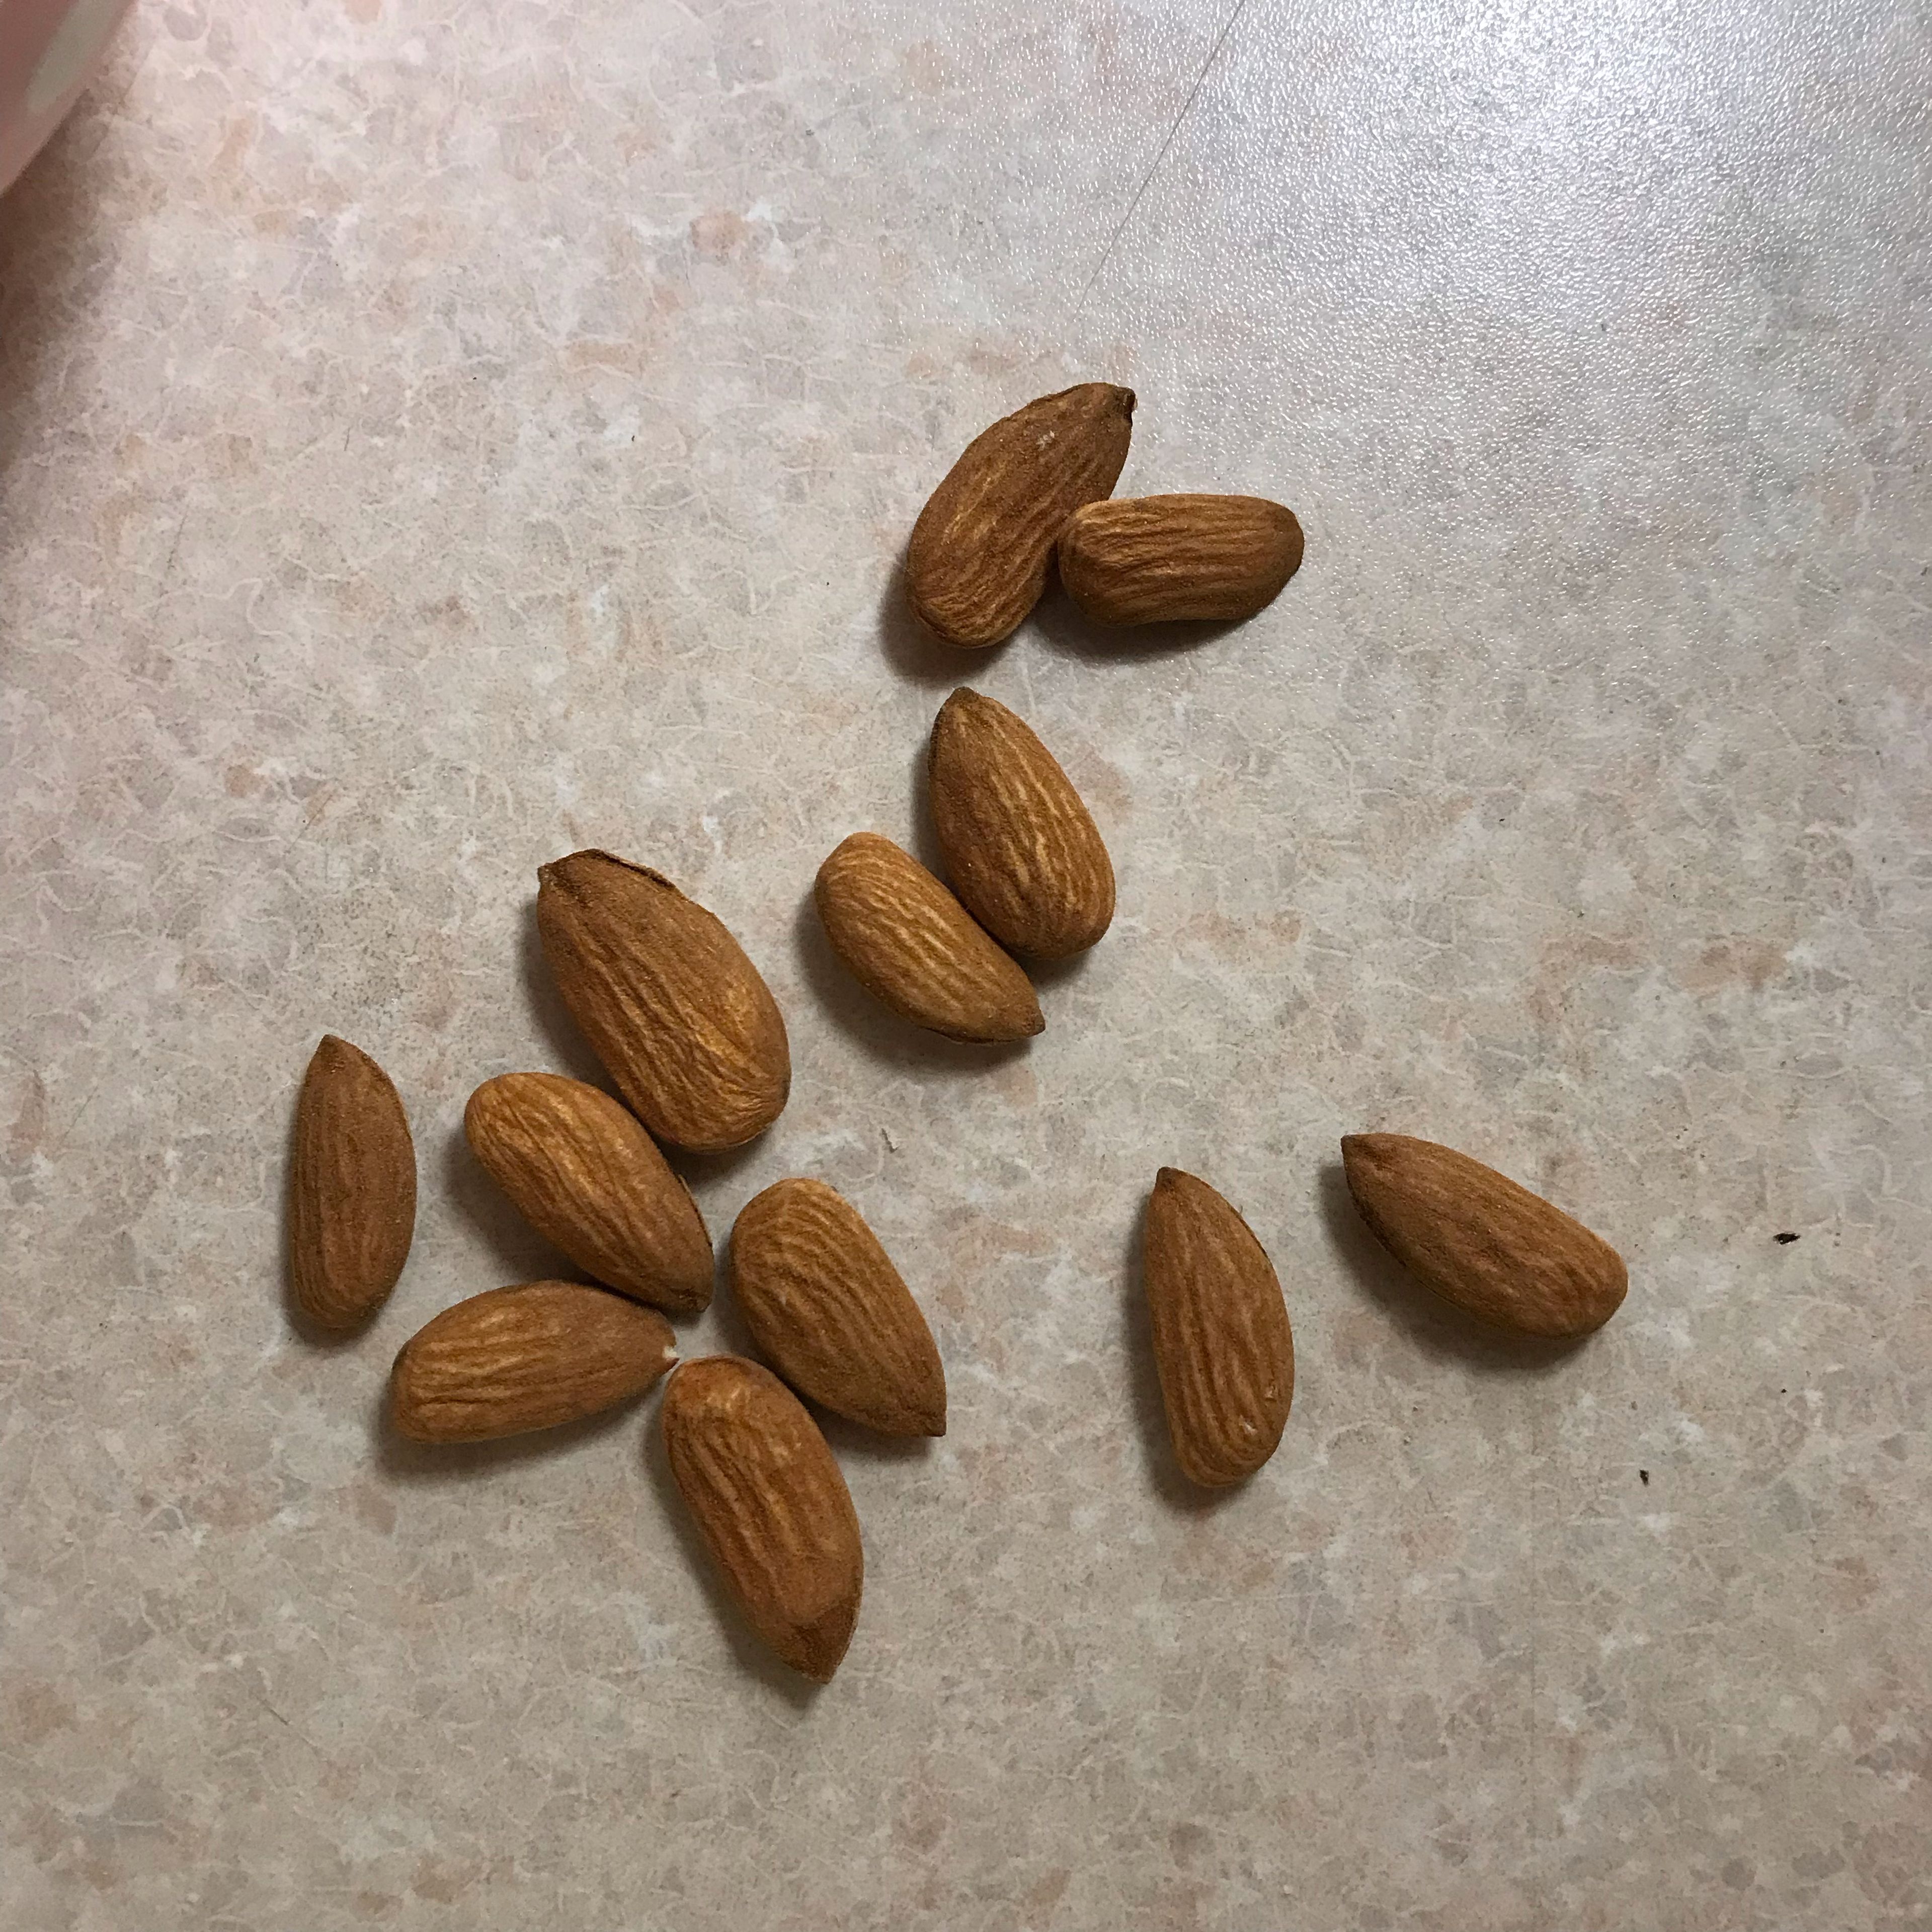 Cut almonds to little pieces.